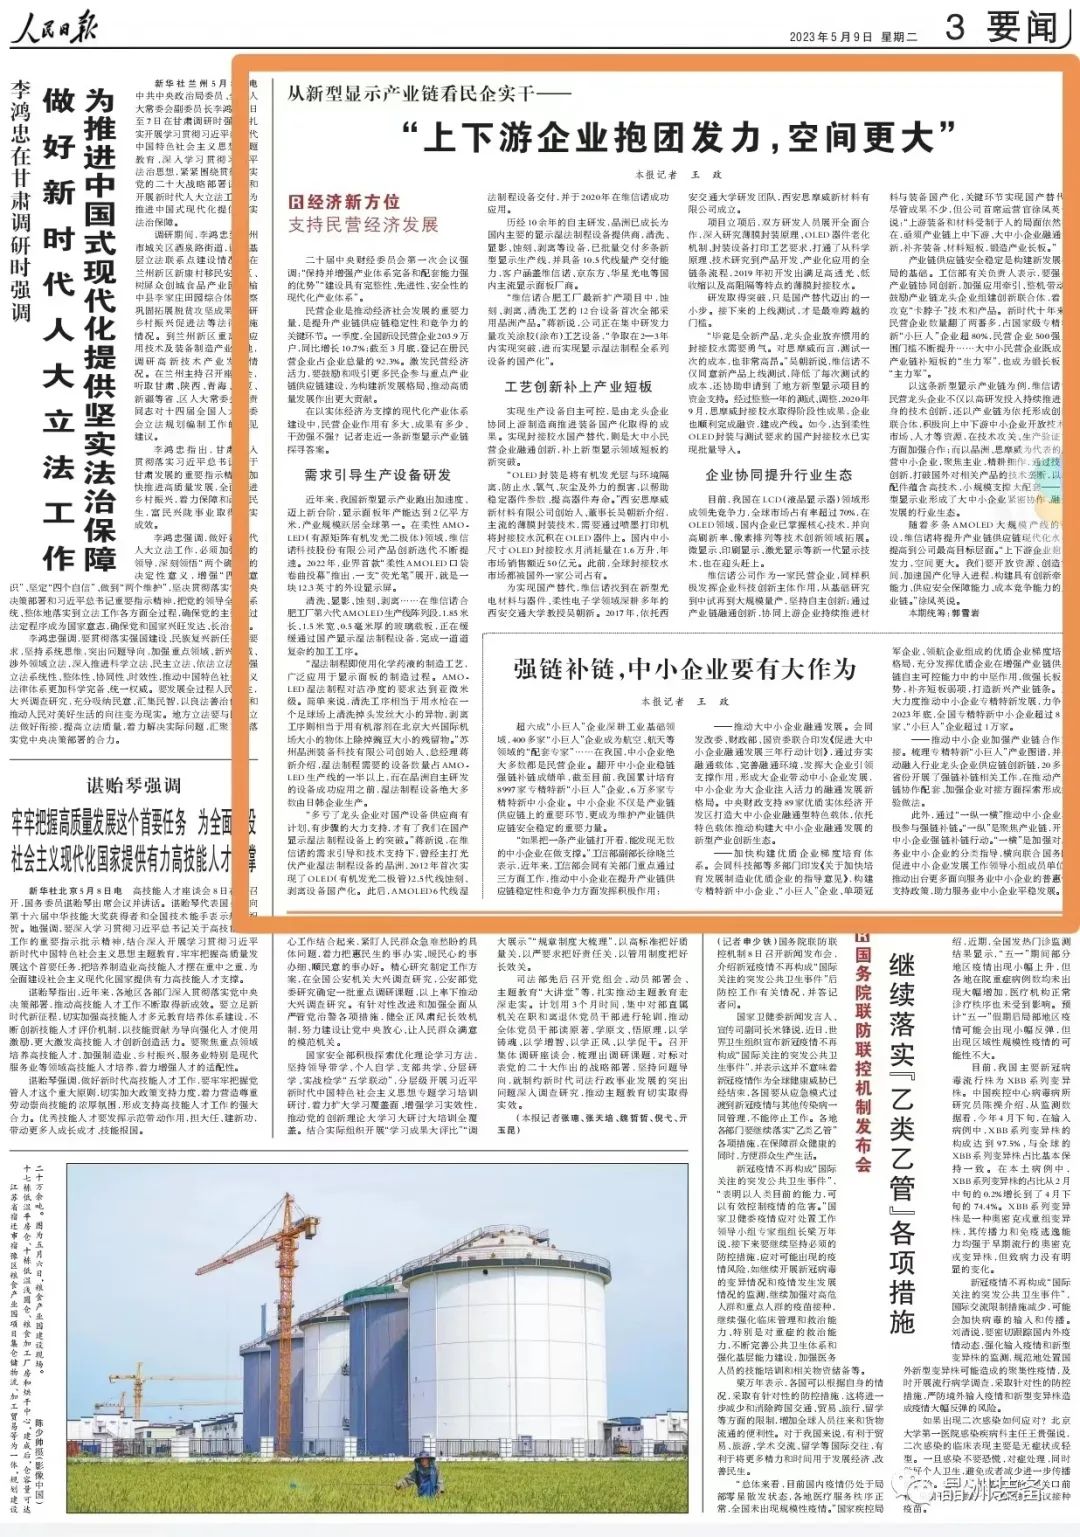 Special Interview Report on People's Daily